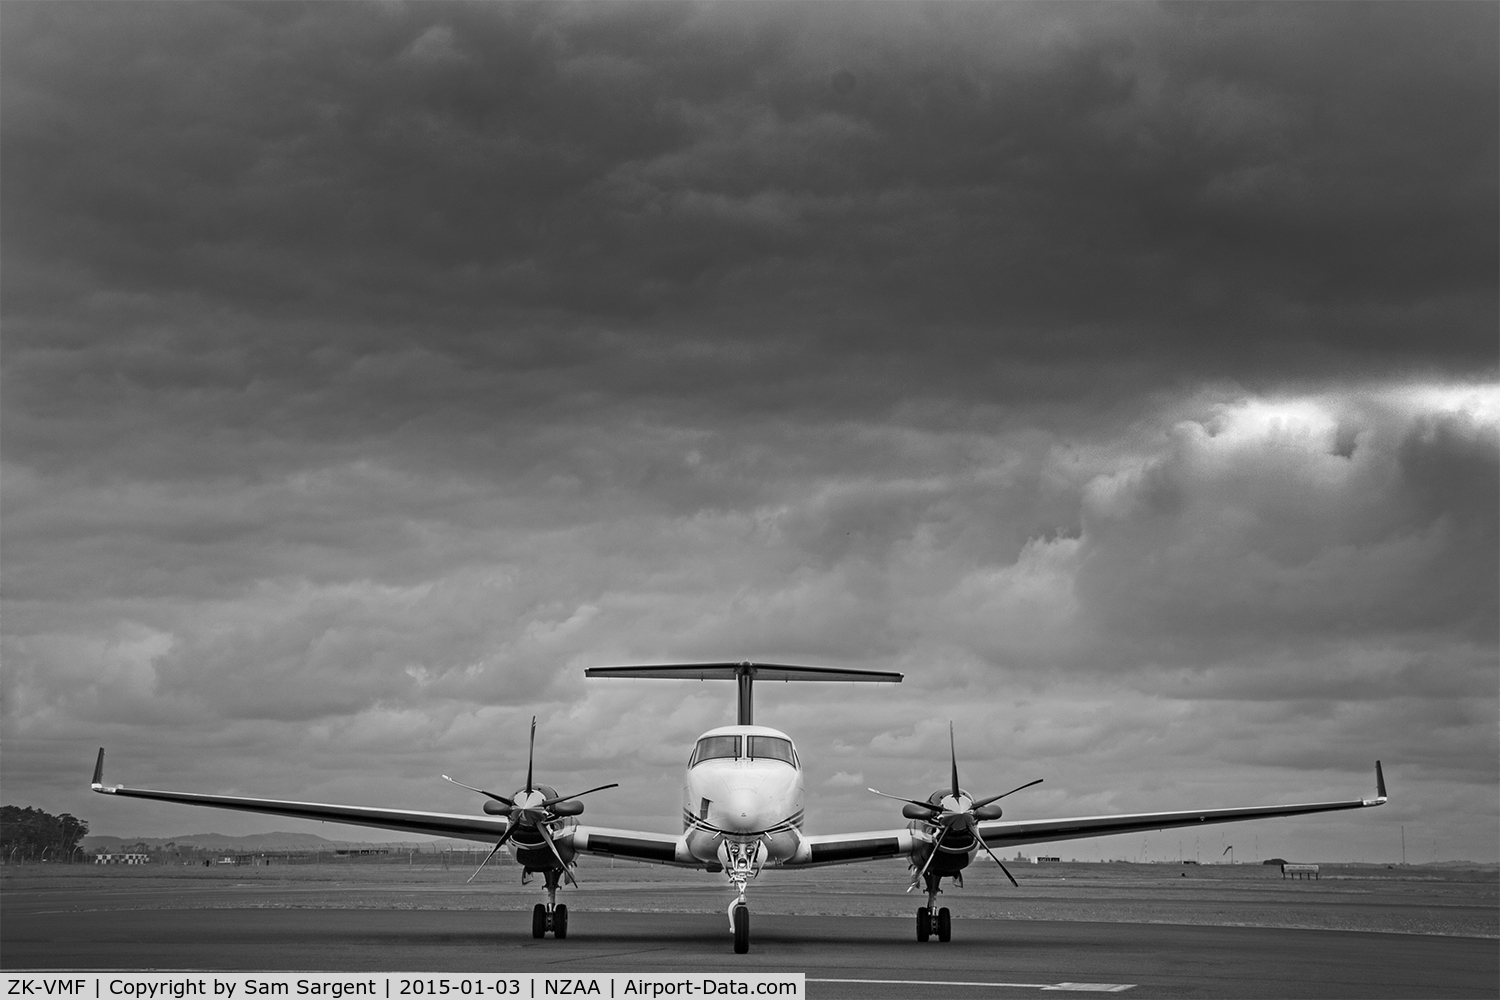 ZK-VMF, 2008 Hawker Beechcraft B200GT King Air C/N BY-57, ZK-VMF on NZAA apron for JetBLAK shoot (Image is copyrighted to BLAK International)